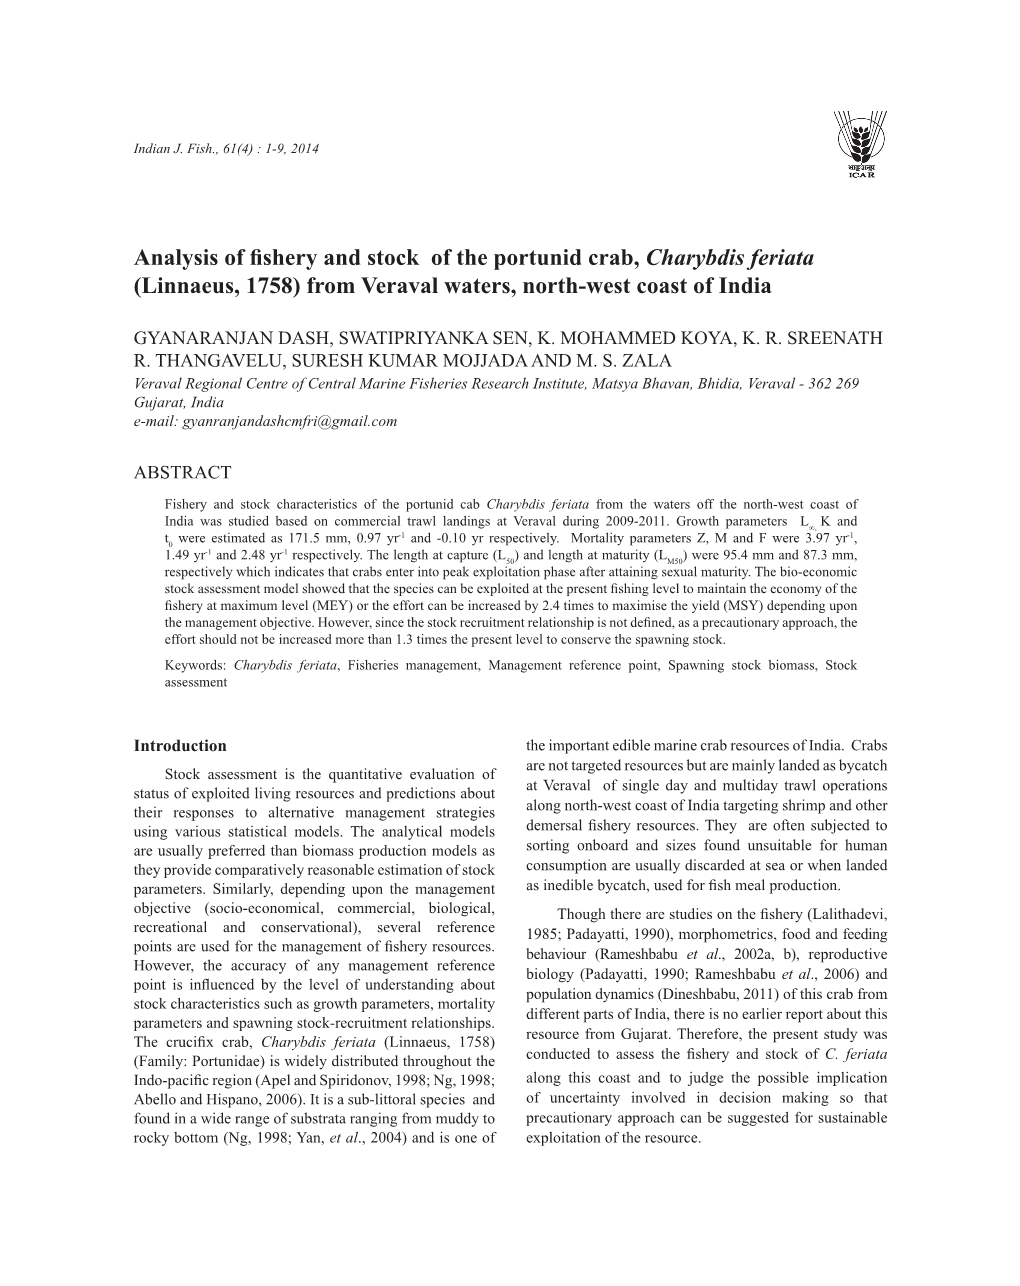 Analysis of Fishery and Stock of the Portunid Crab, Charybdis Feriata (Linnaeus, 1758) from Veraval Waters, North-West Coast of India